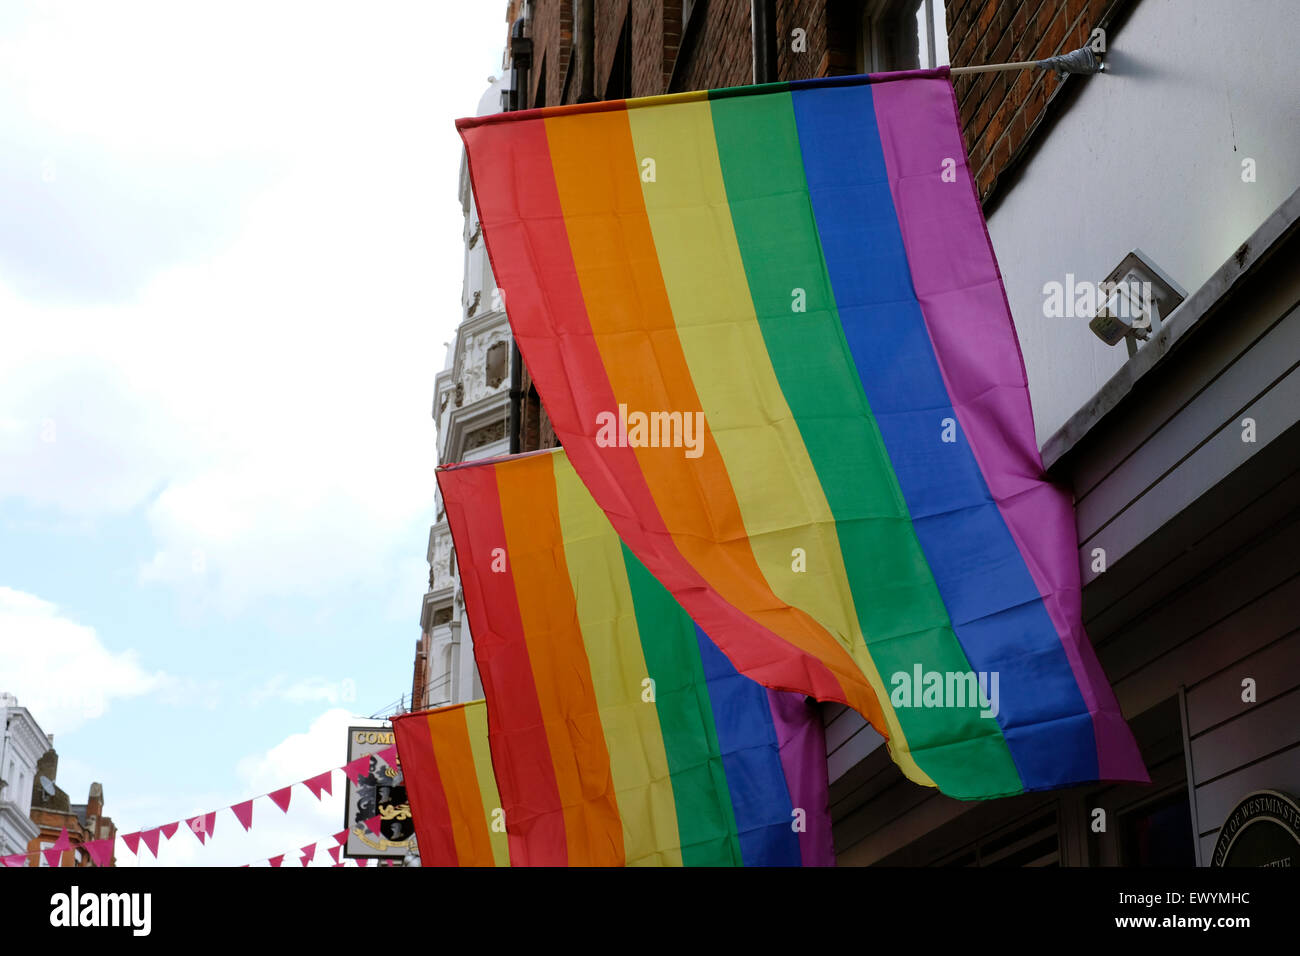 Gay flags on display in Soho, central London Stock Photo